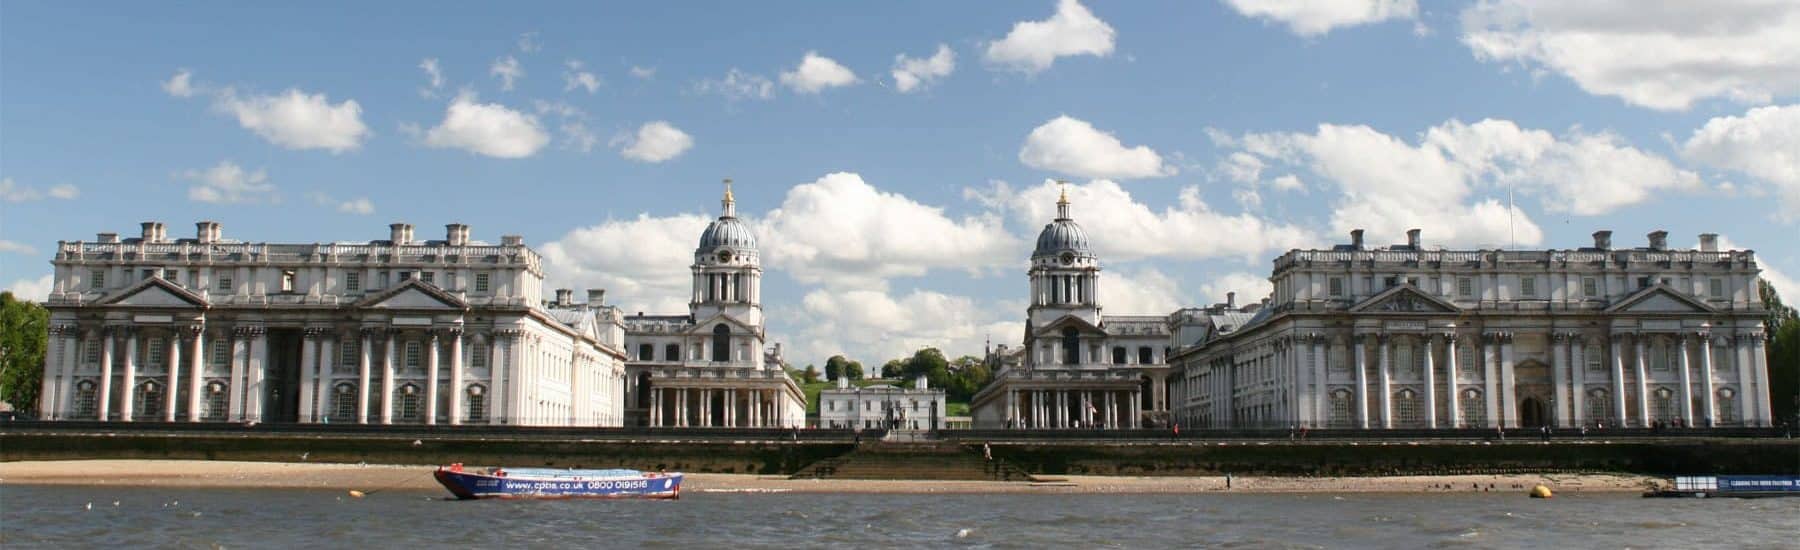 The Old Royal Naval College in the Royal Borough of Greenwich